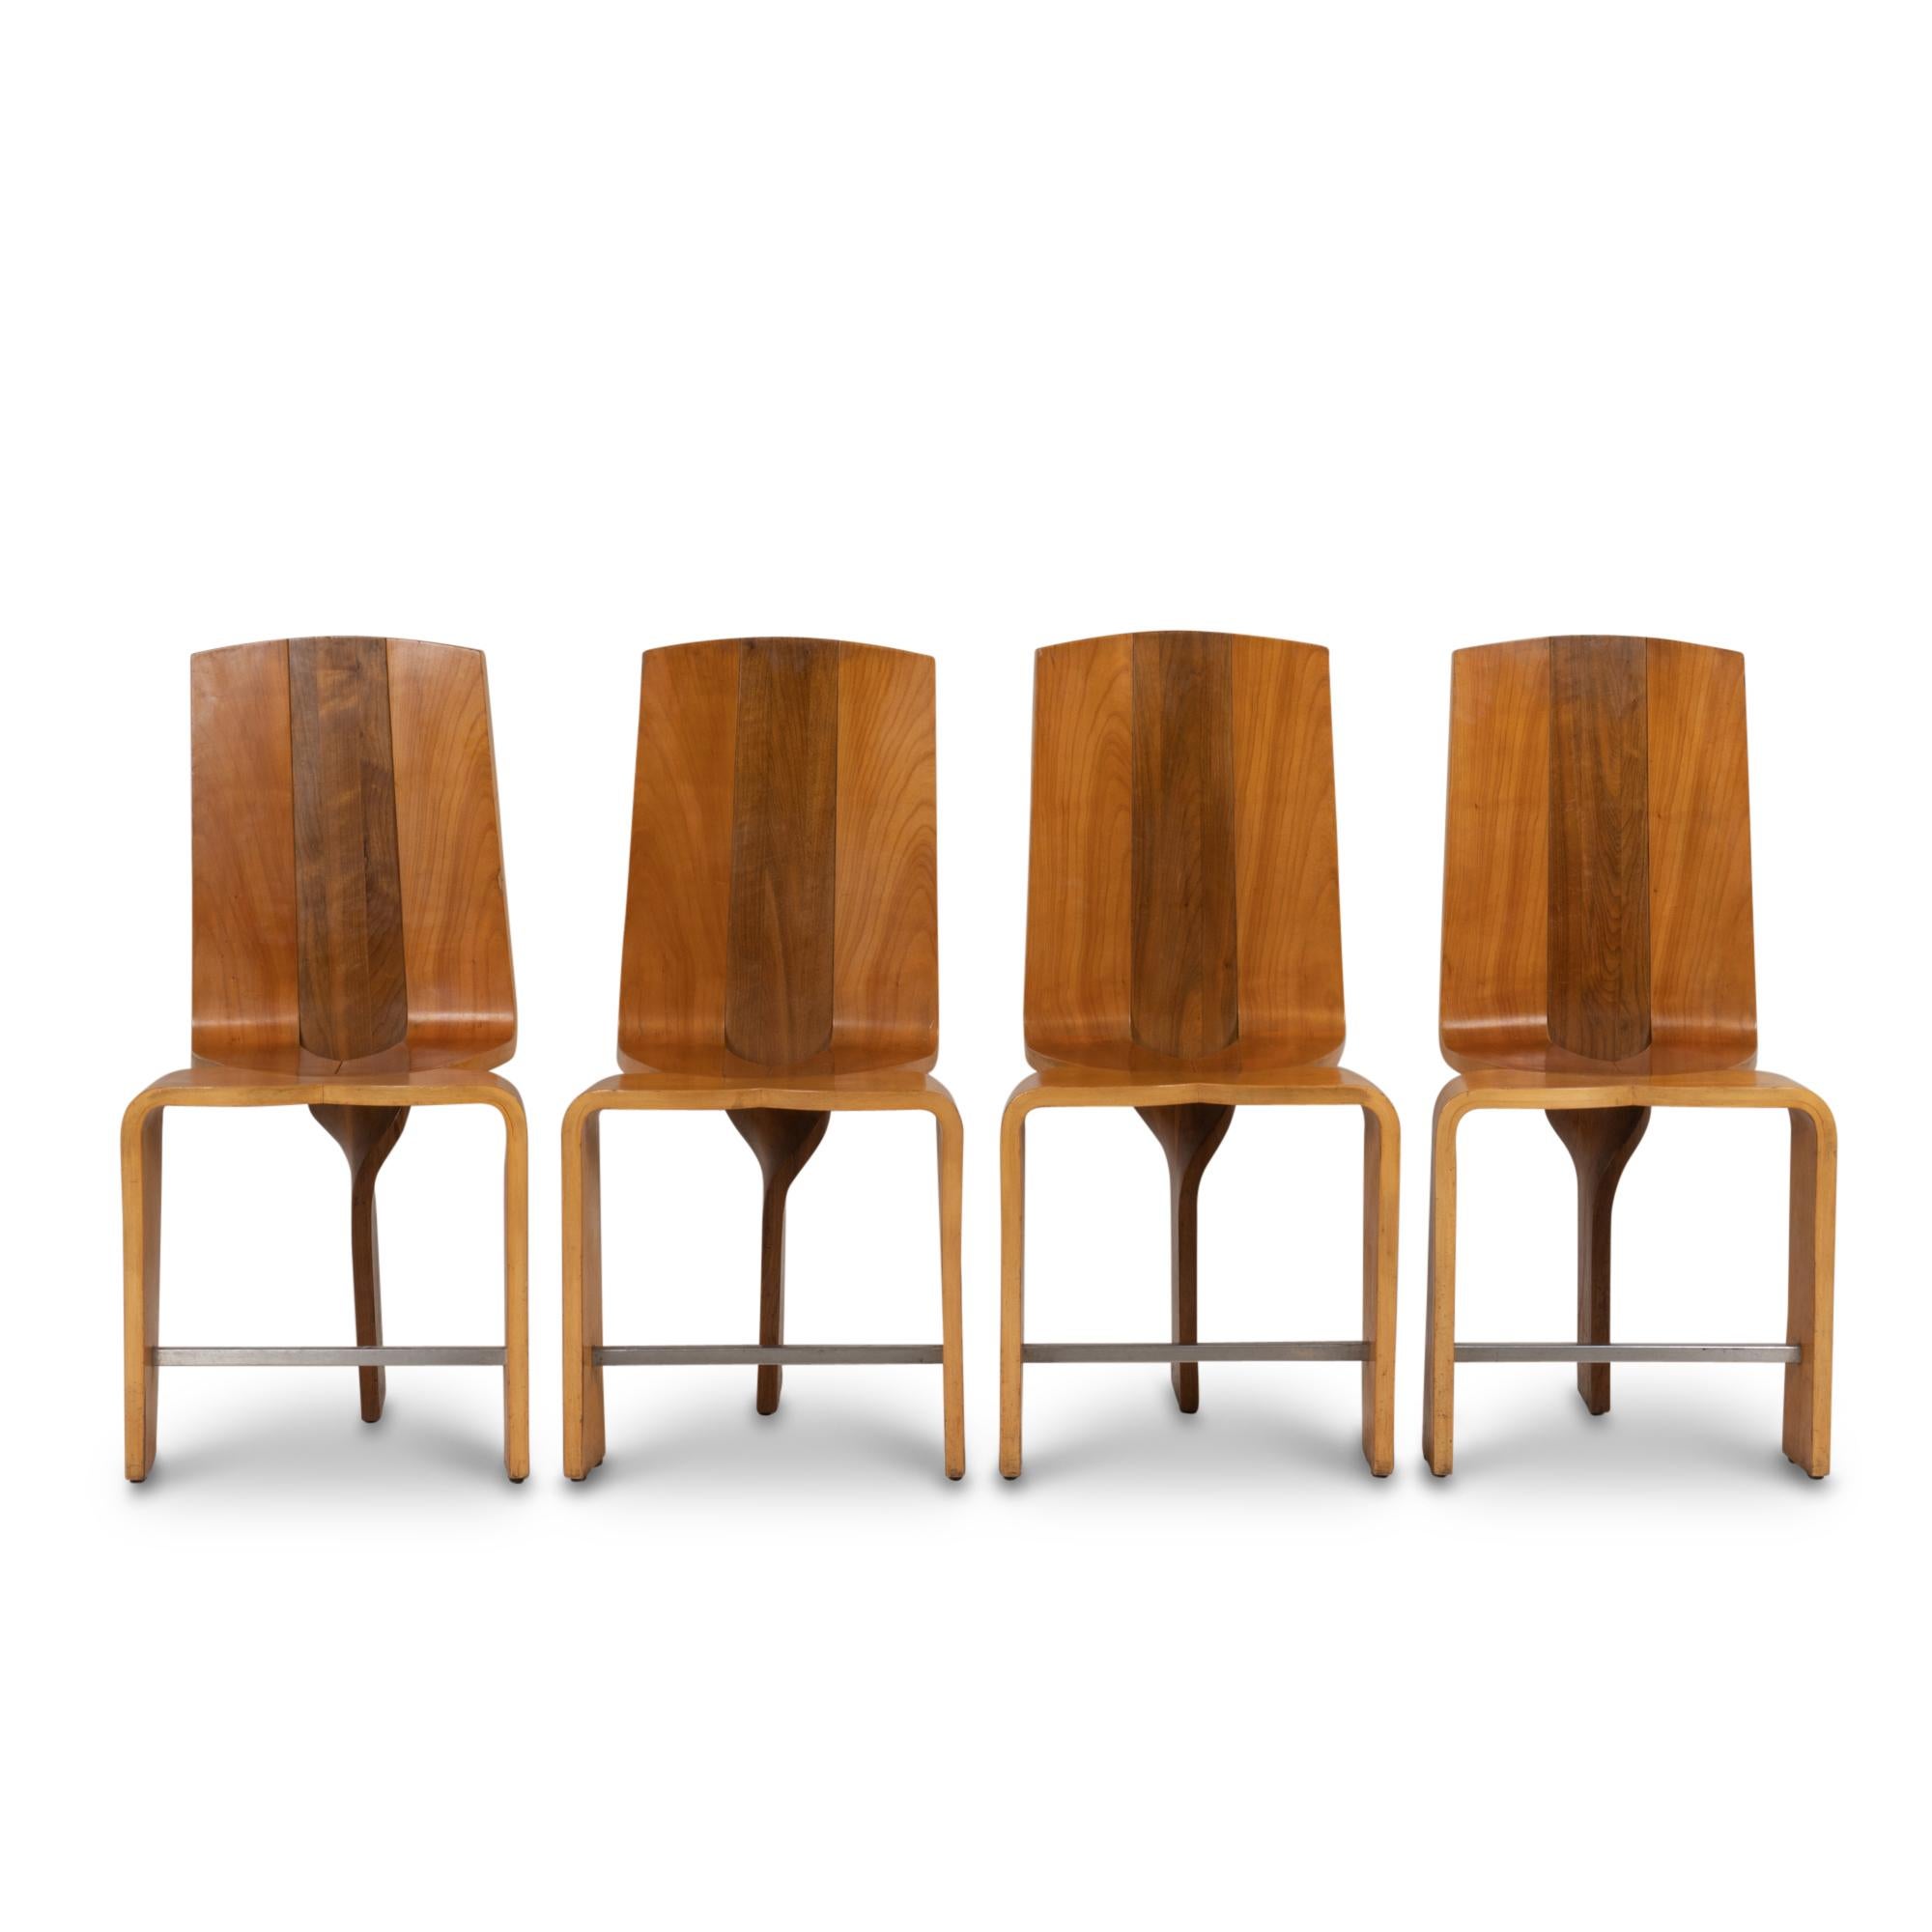 Series of eight blond cherry wood chairs. Tripod base. Face of the base joined by a spacer bar, base of the back of wavy and abstract shape.

Work realized in the 1980s.